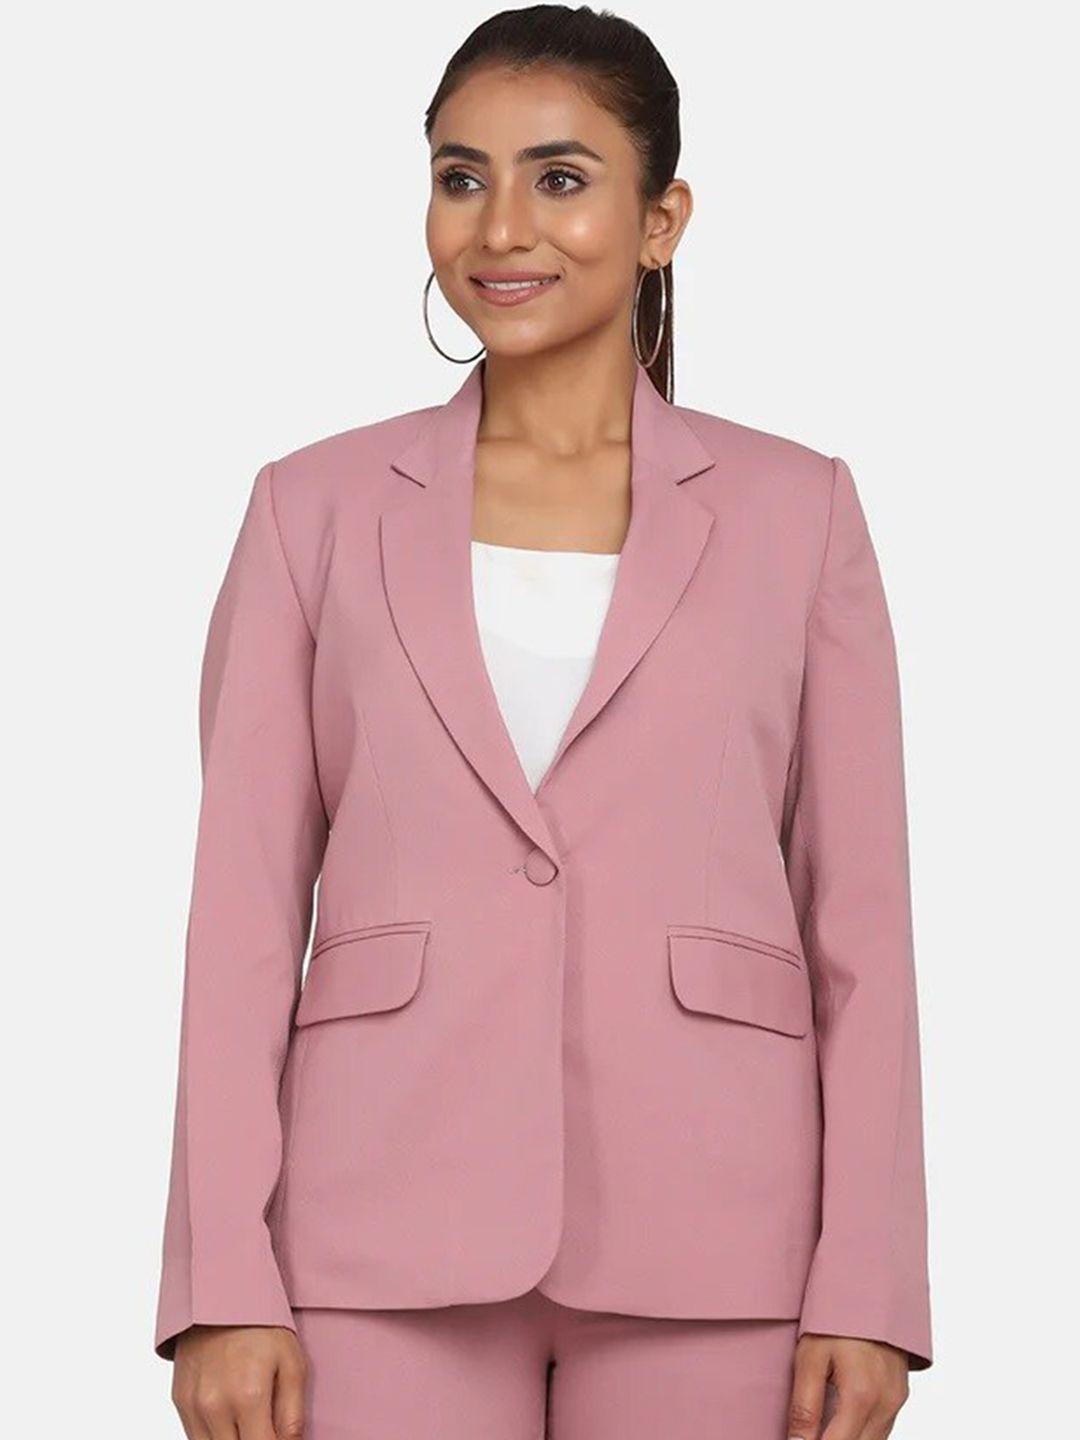 powersutra-women-solid-single-breasted-blazers